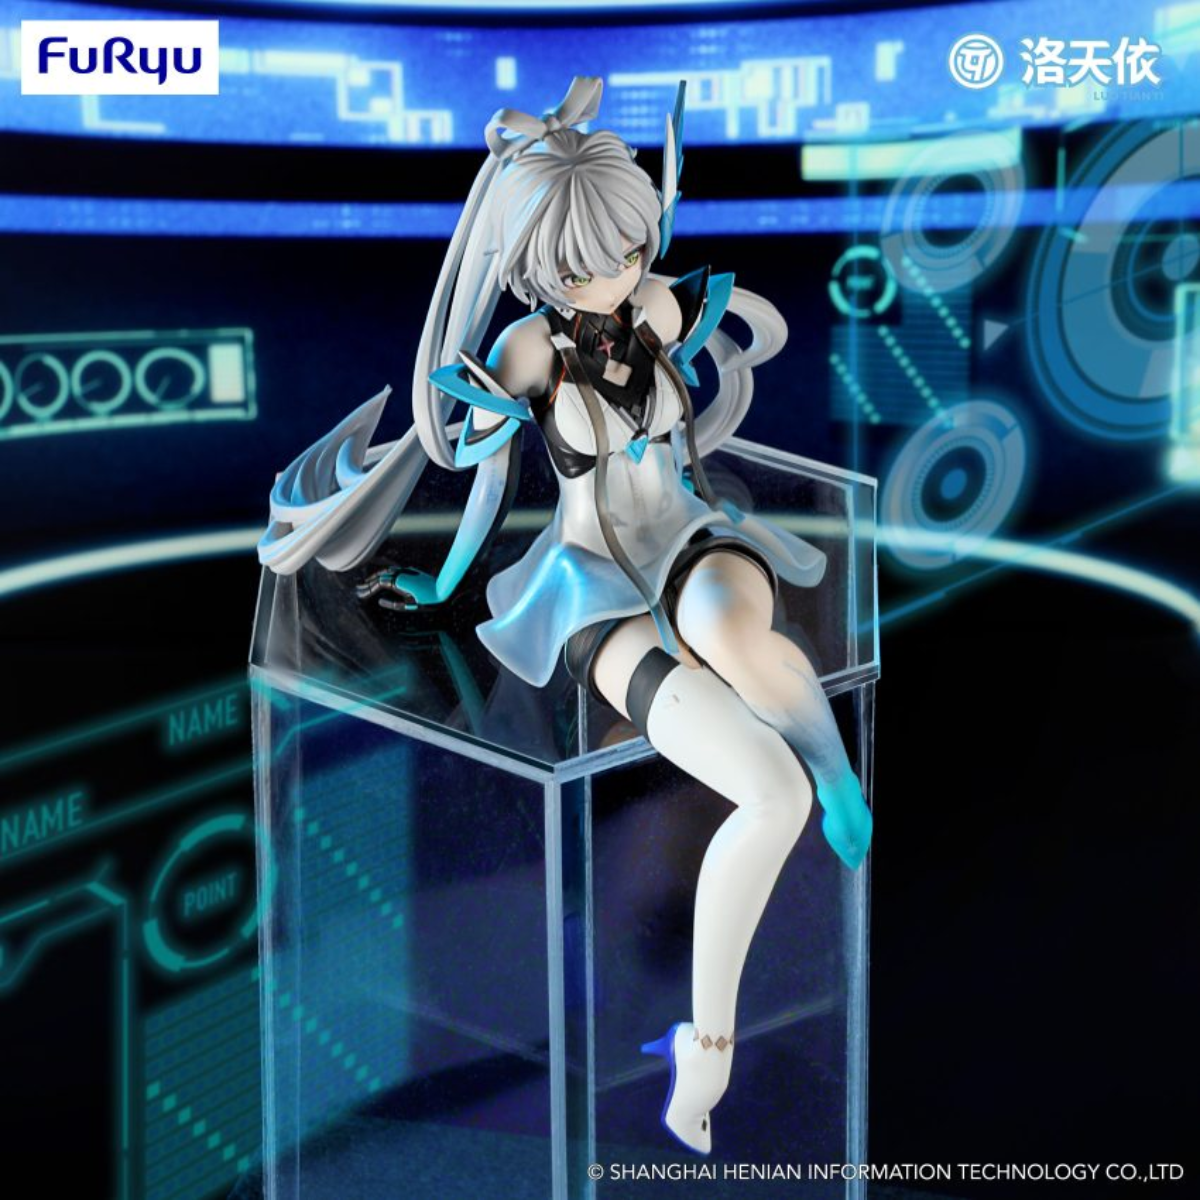 V Singer LUO TIAN YI Noodle Stopper Figure &quot;Luuo Tian Yi&quot; ( Code Luo Ver.)-FuRyu-Ace Cards &amp; Collectibles